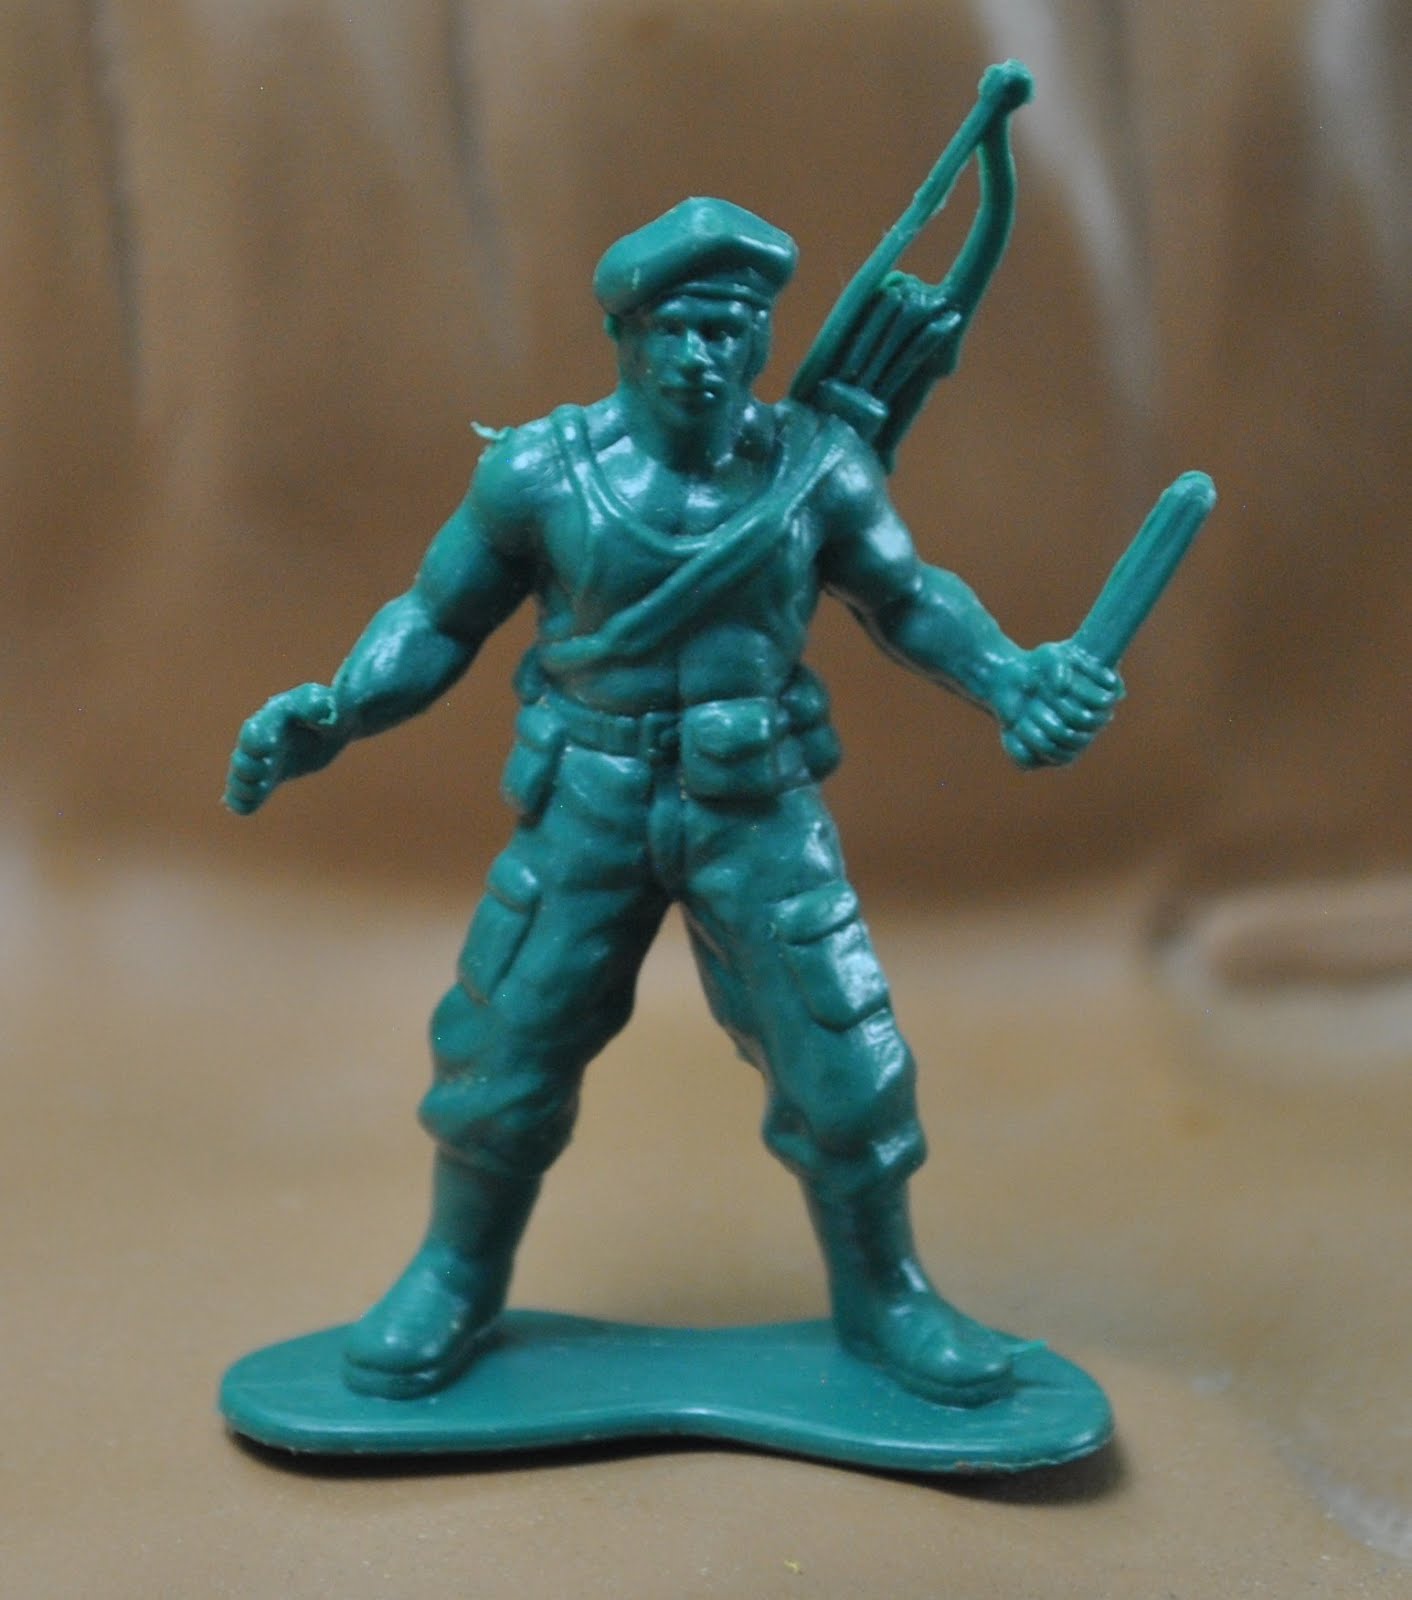 This Blog is dedicated to plastic Army men from the 1980s Cold War through today's War on Terror.